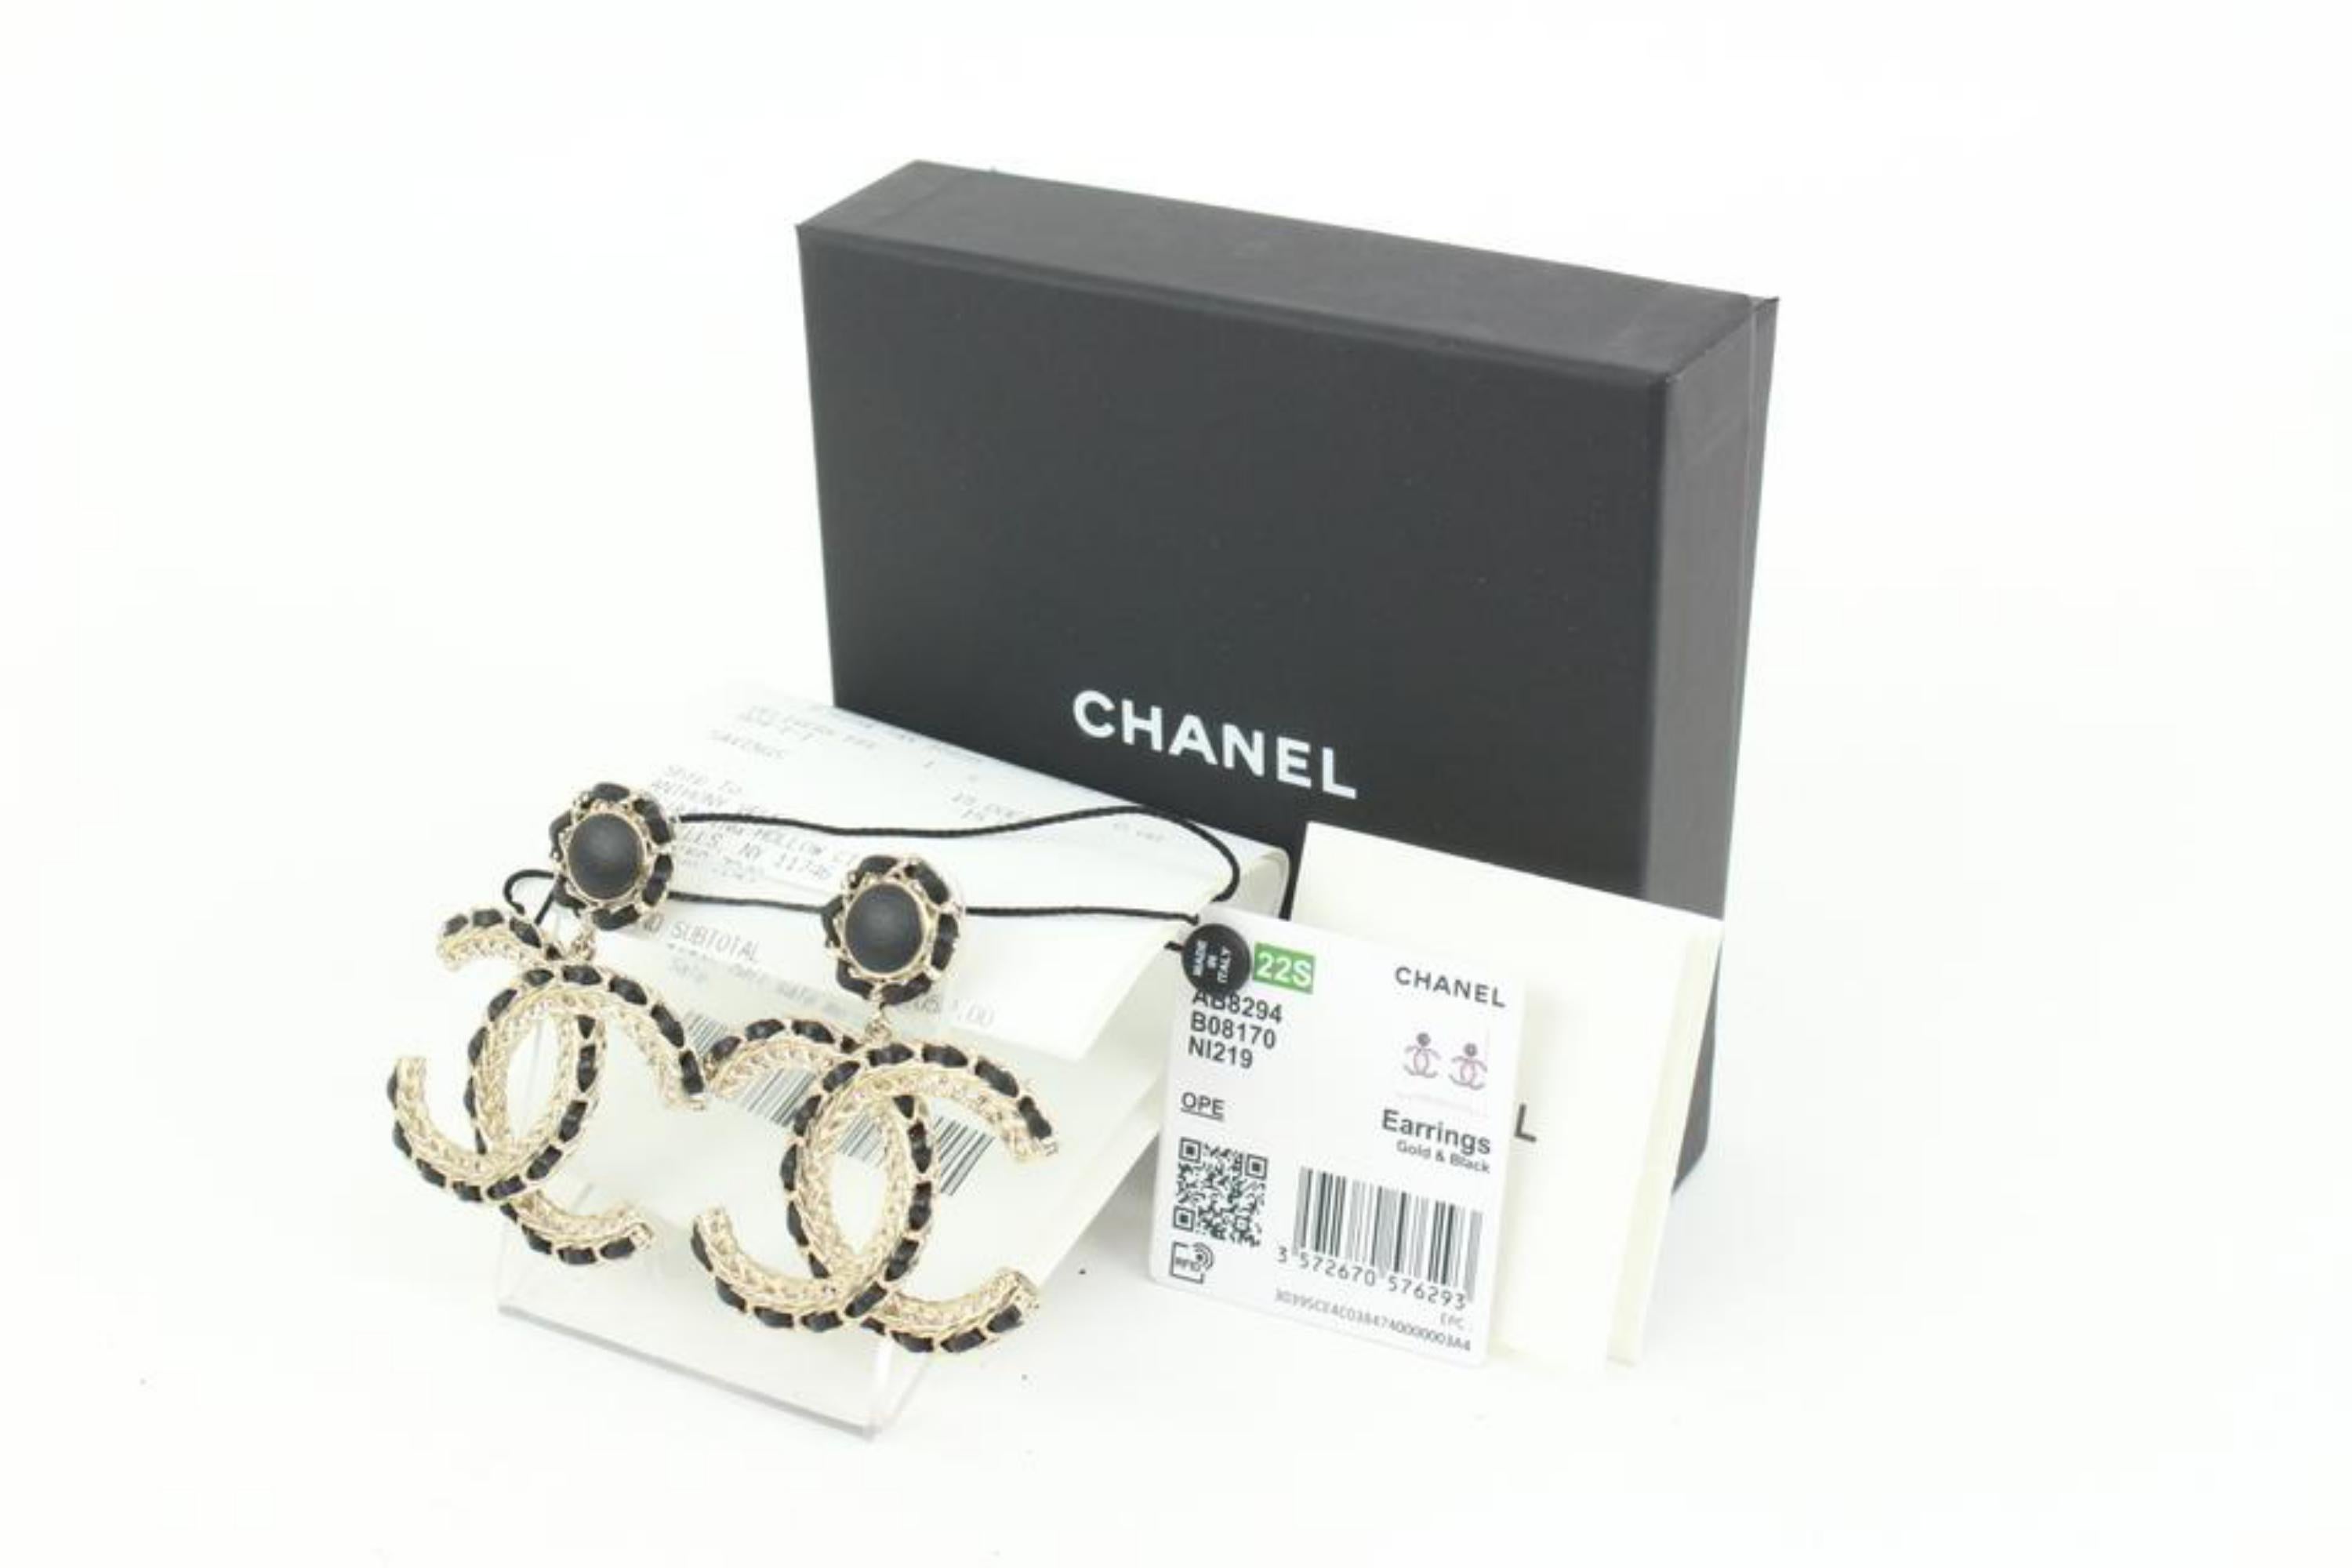 Chanel B 22S Jumbo Interlaced CC Chain Drop Earrings 17cz413s
Date Code/Serial Number: B22 S
Made In: Italy
Measurements: Length:  1.8